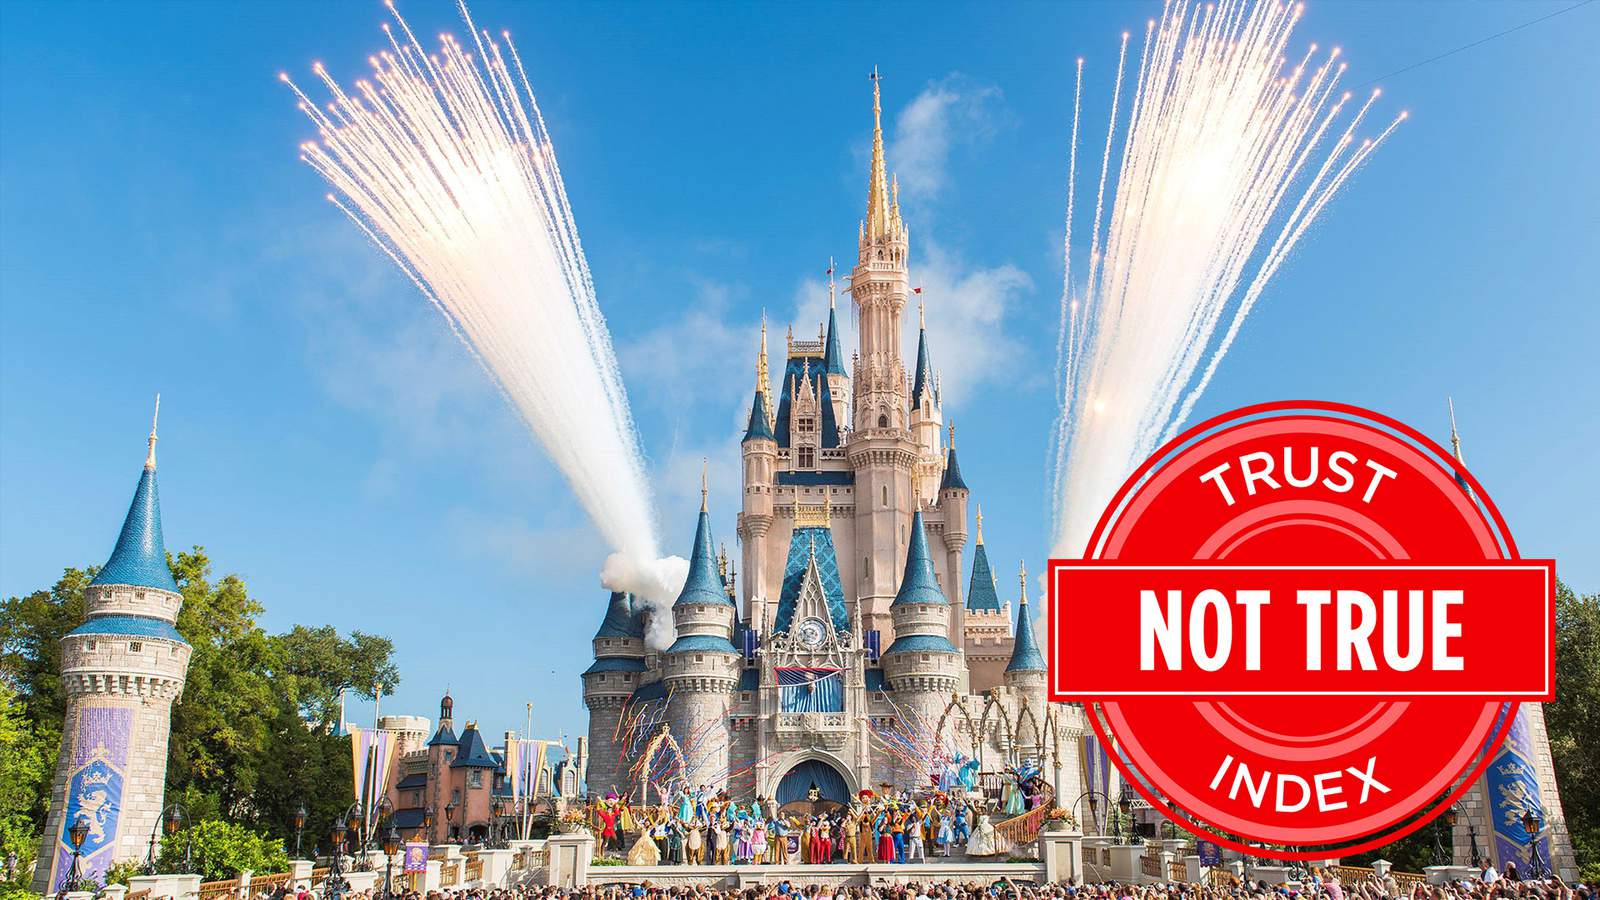 Disneyland Is Not Moving To Texas From California Despite Rumor